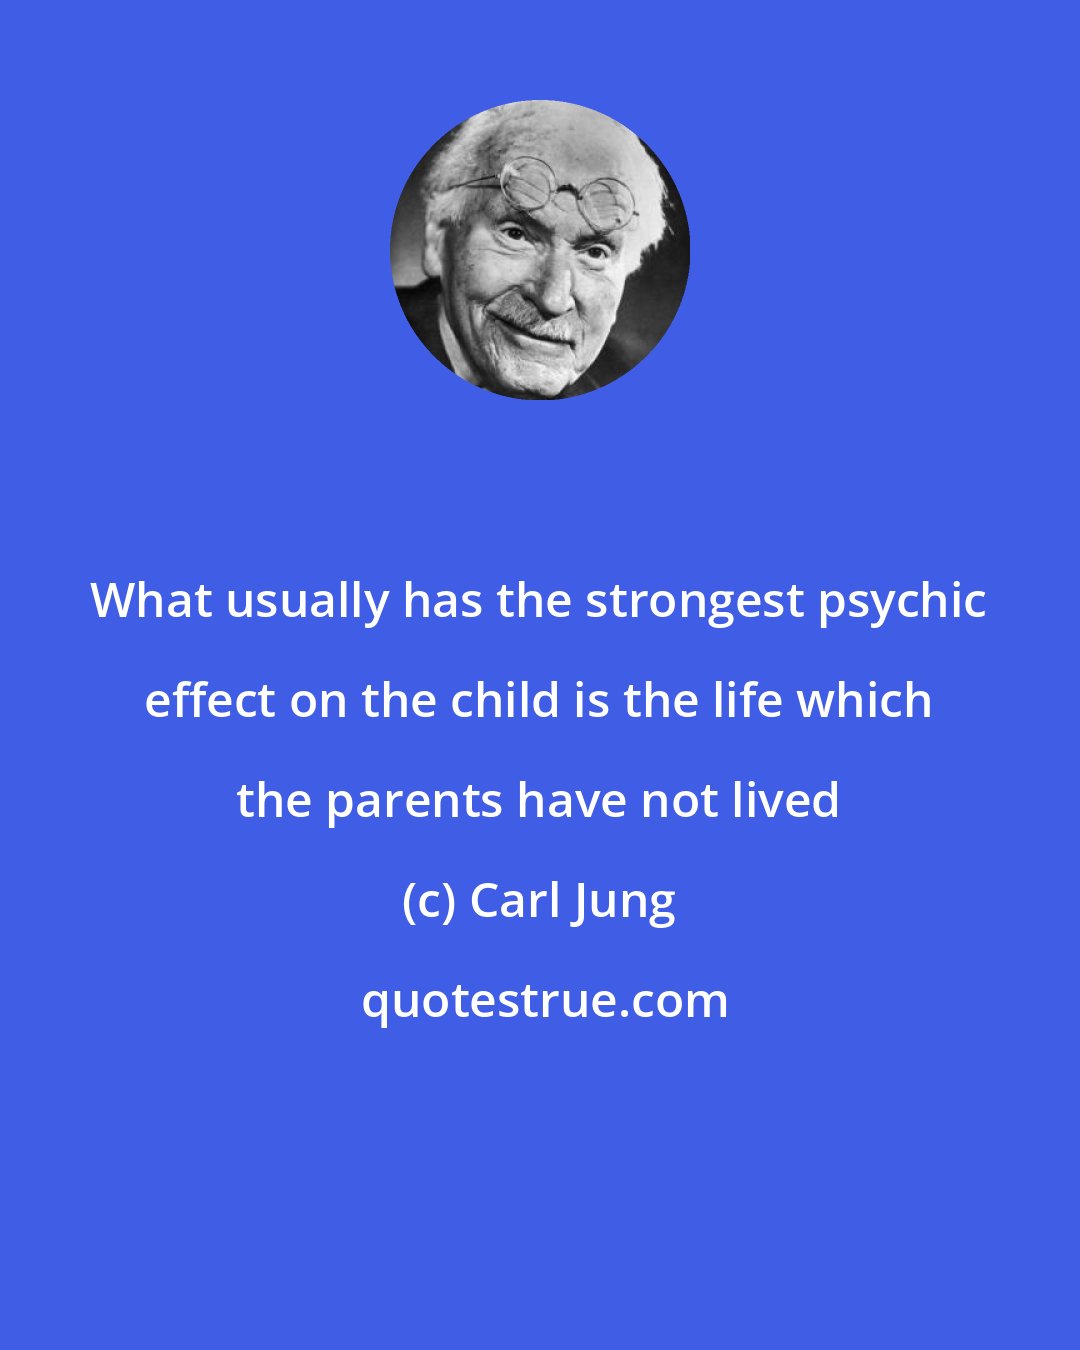 Carl Jung: What usually has the strongest psychic effect on the child is the life which the parents have not lived